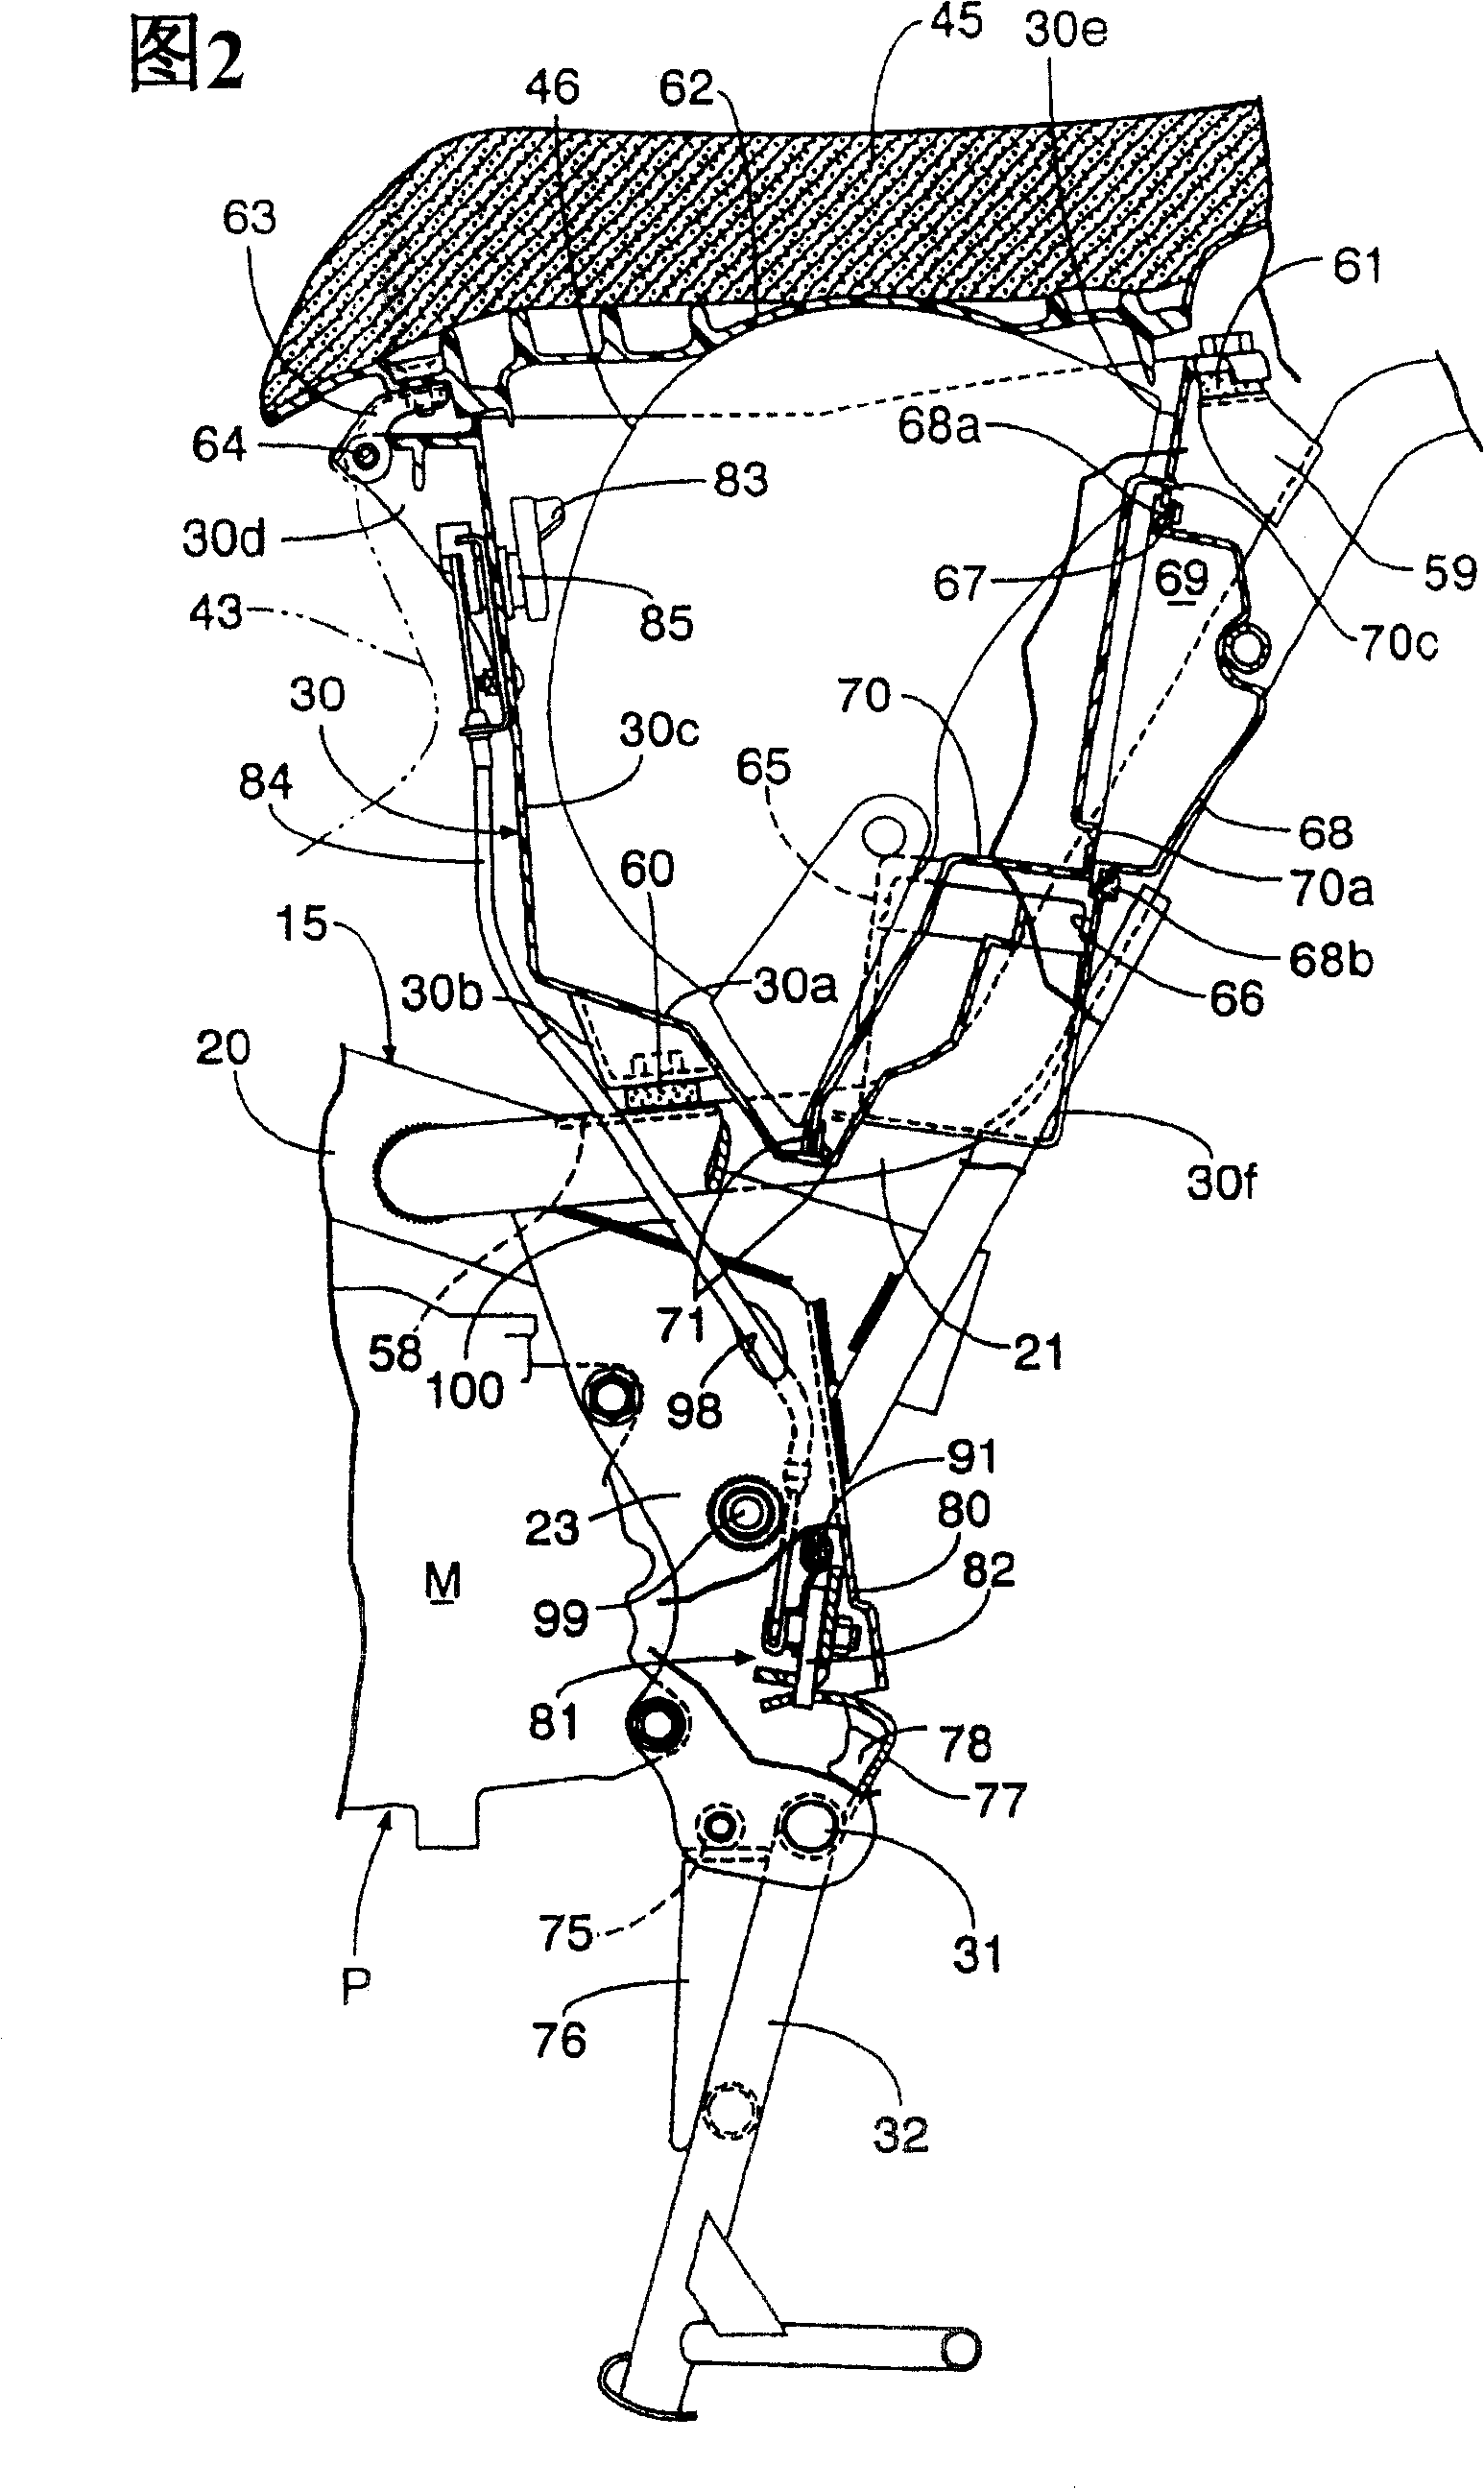 Automatic bicycle with rack locking device